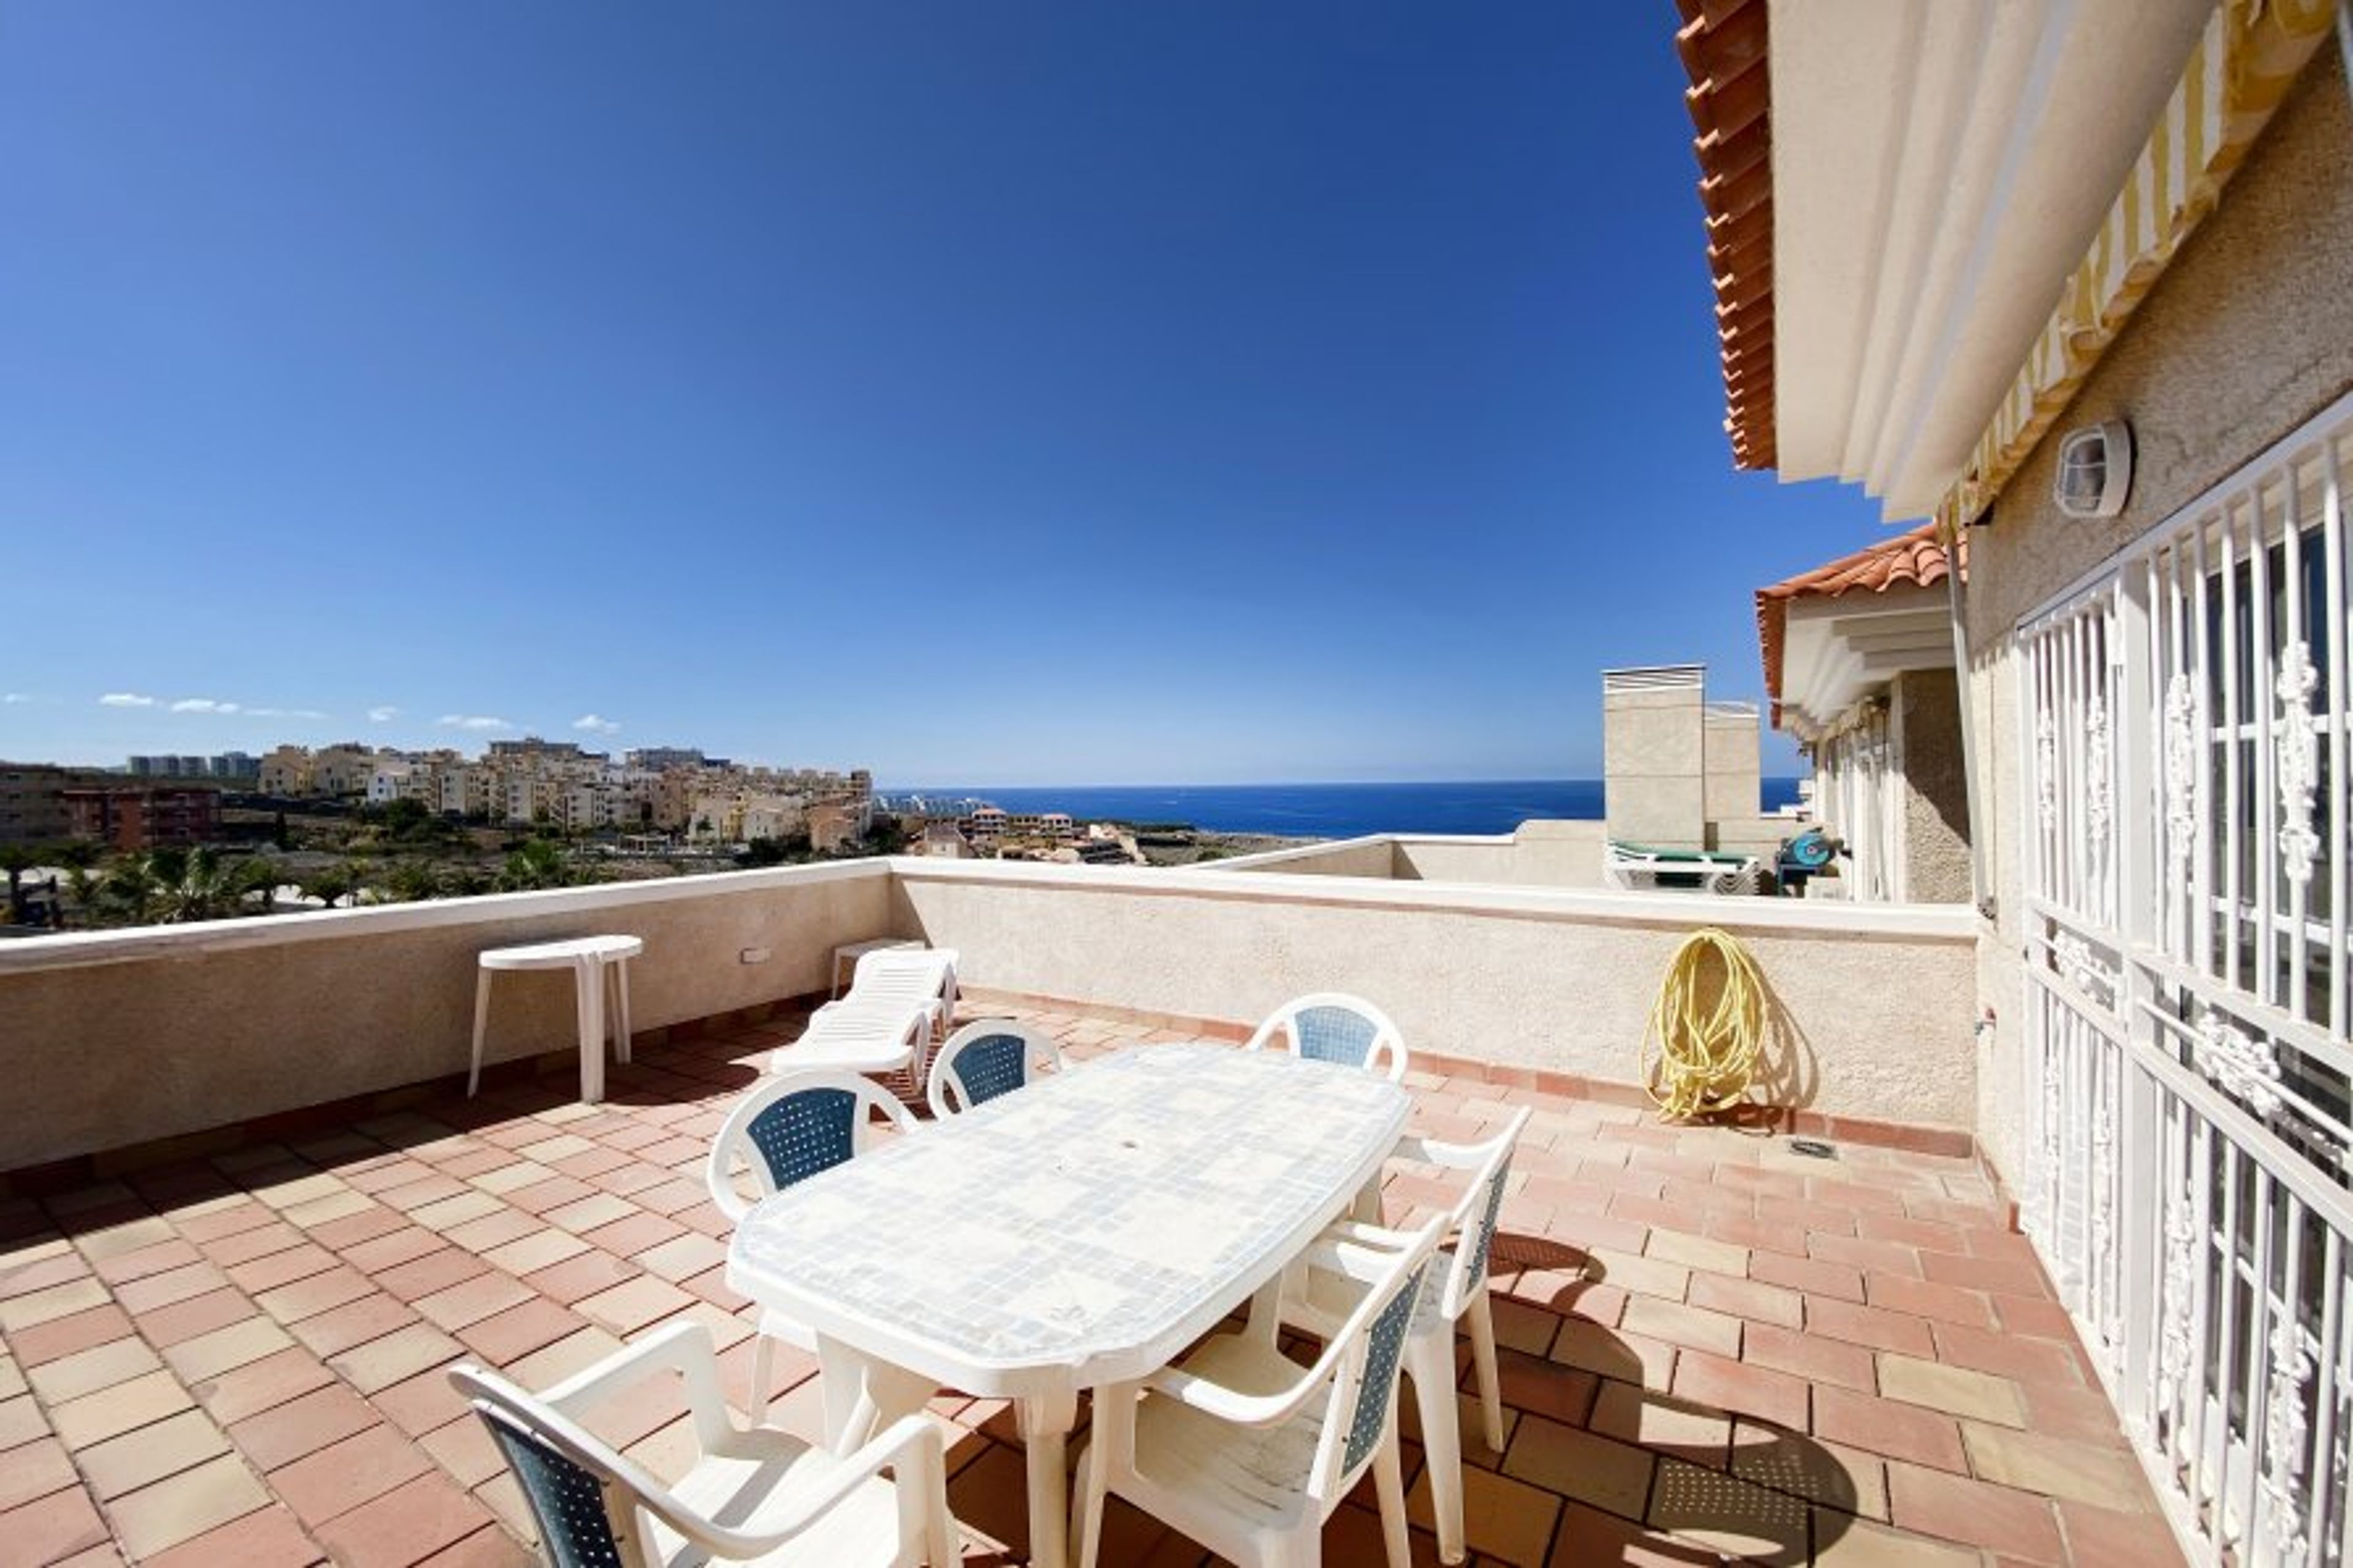 Large private balcony, with all day sun and sea views